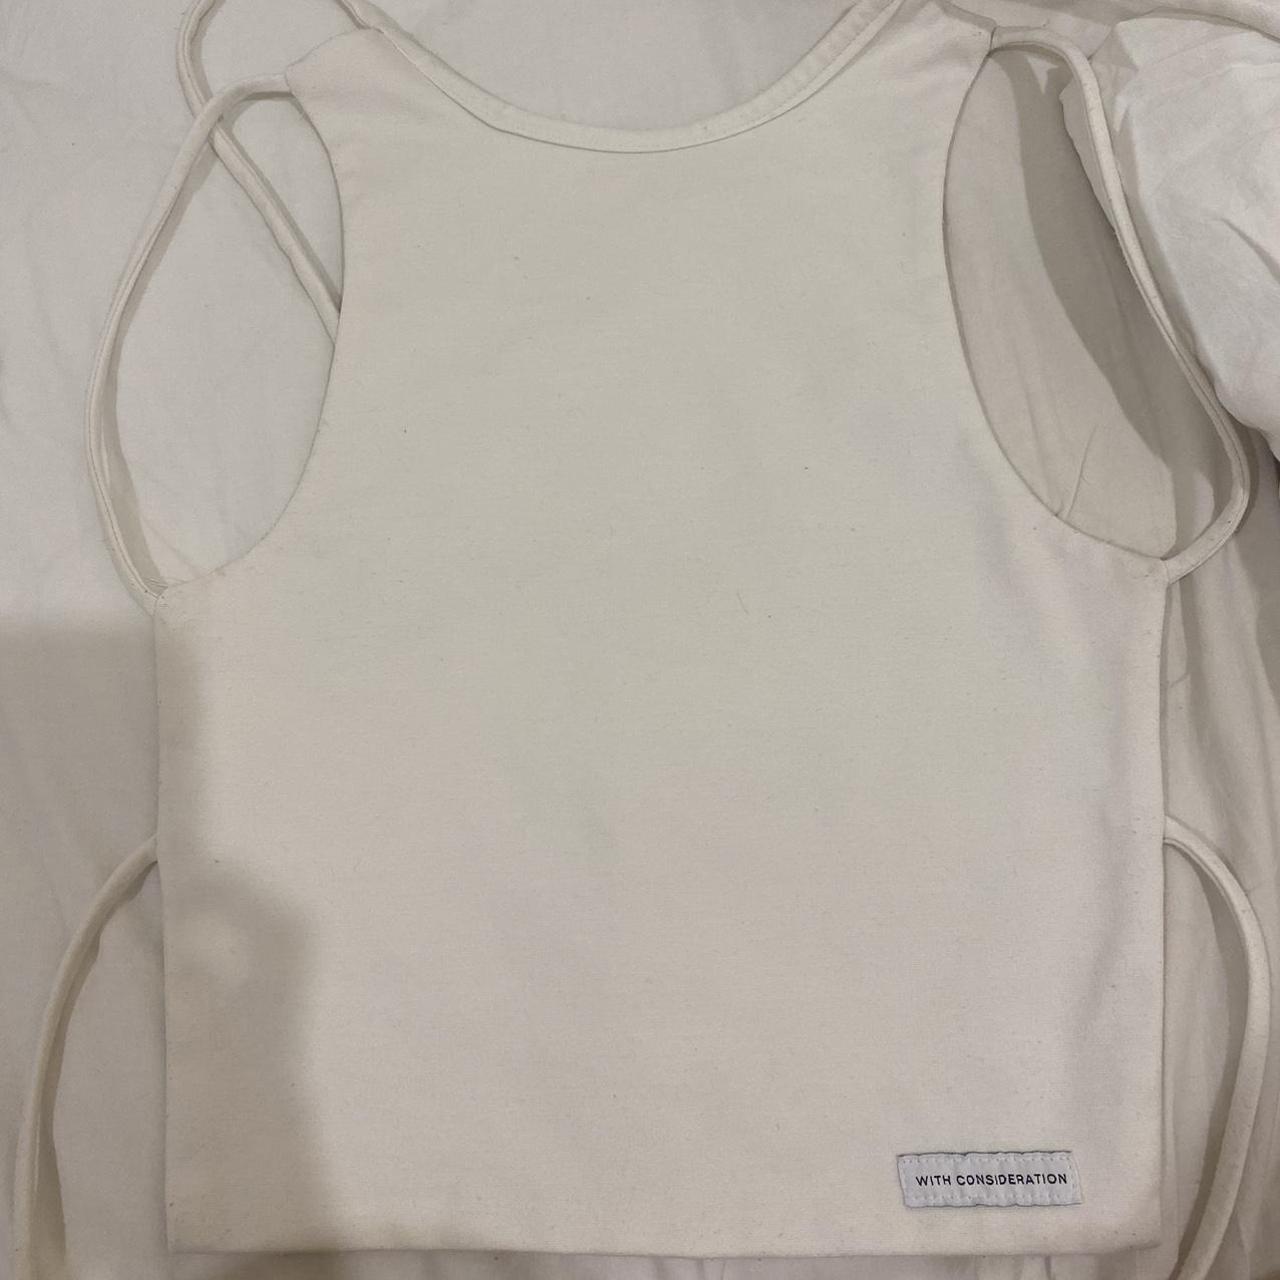 Pics of with consideration top - Depop